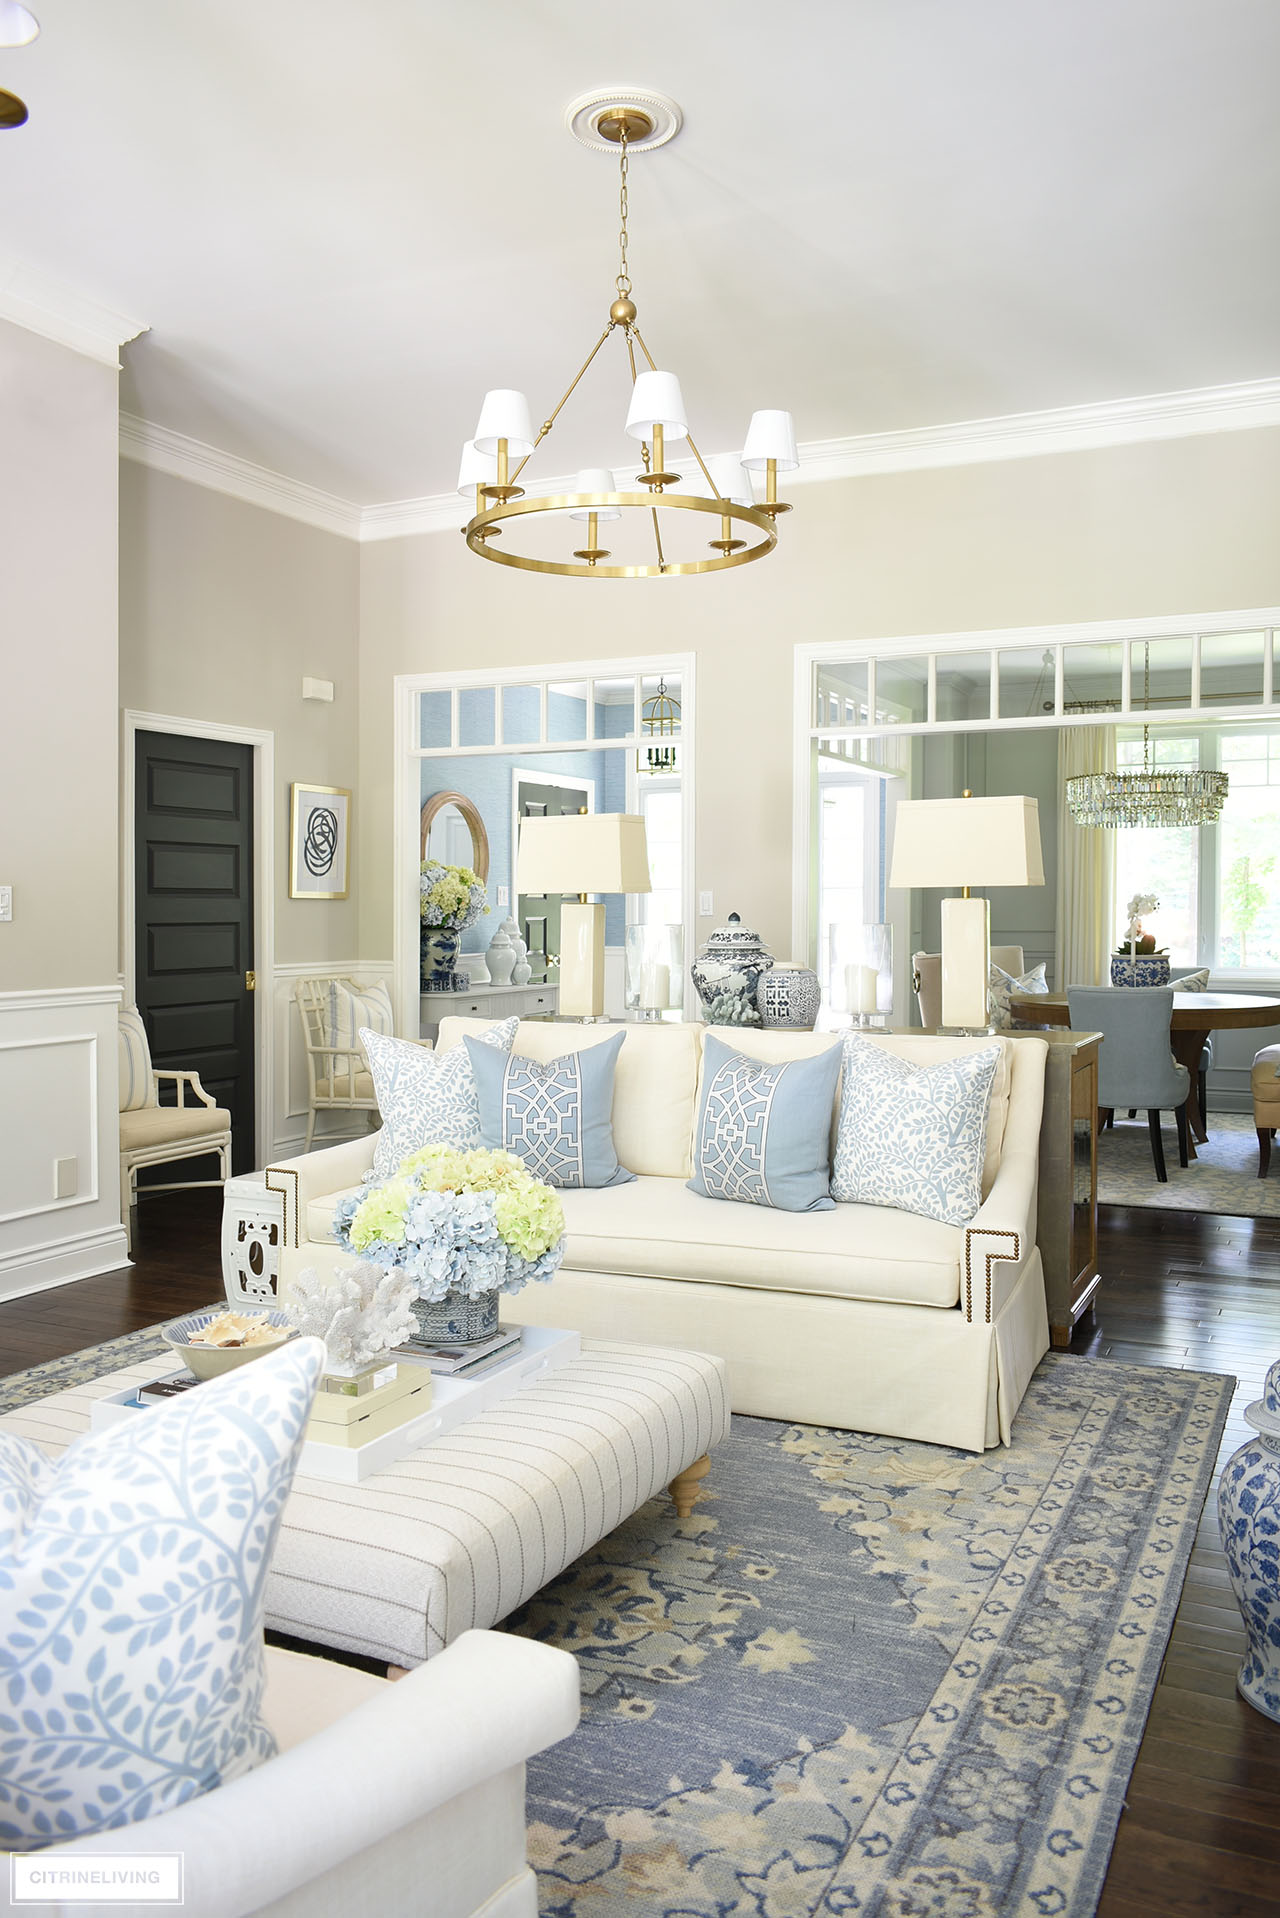 Beautiful living room decorated for summer in blue and white with faux hydrangeas, ginger jars and coastal touches.